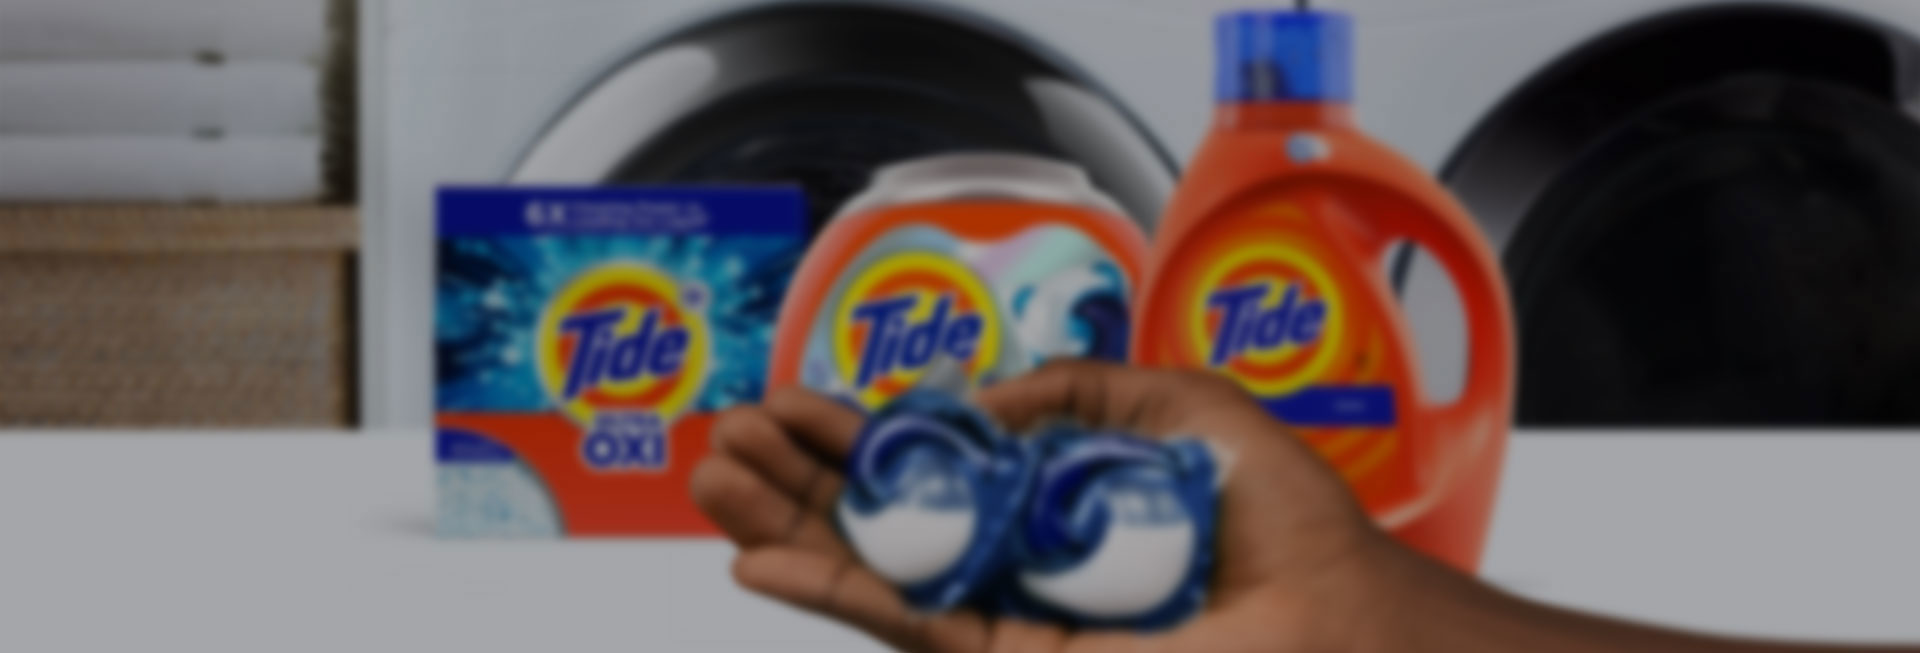 A person holding Tide PODS  washing capsules in front of some Tide laundry products